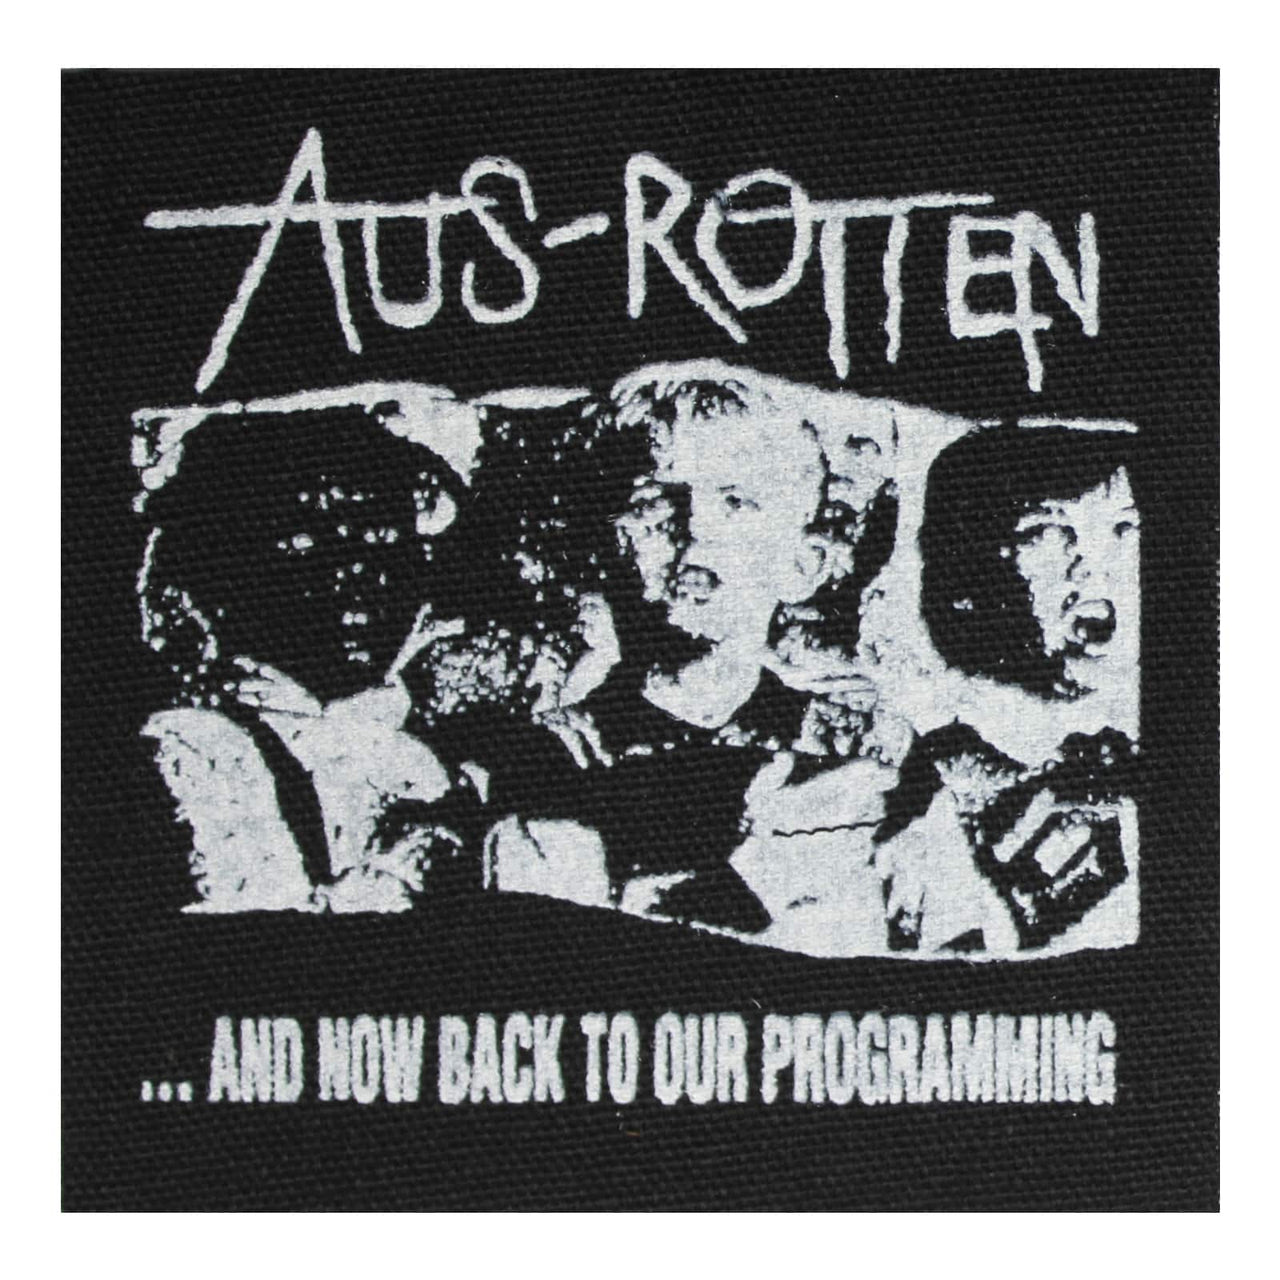 Aus Rotten Now Back to Our Programming Cloth Patch